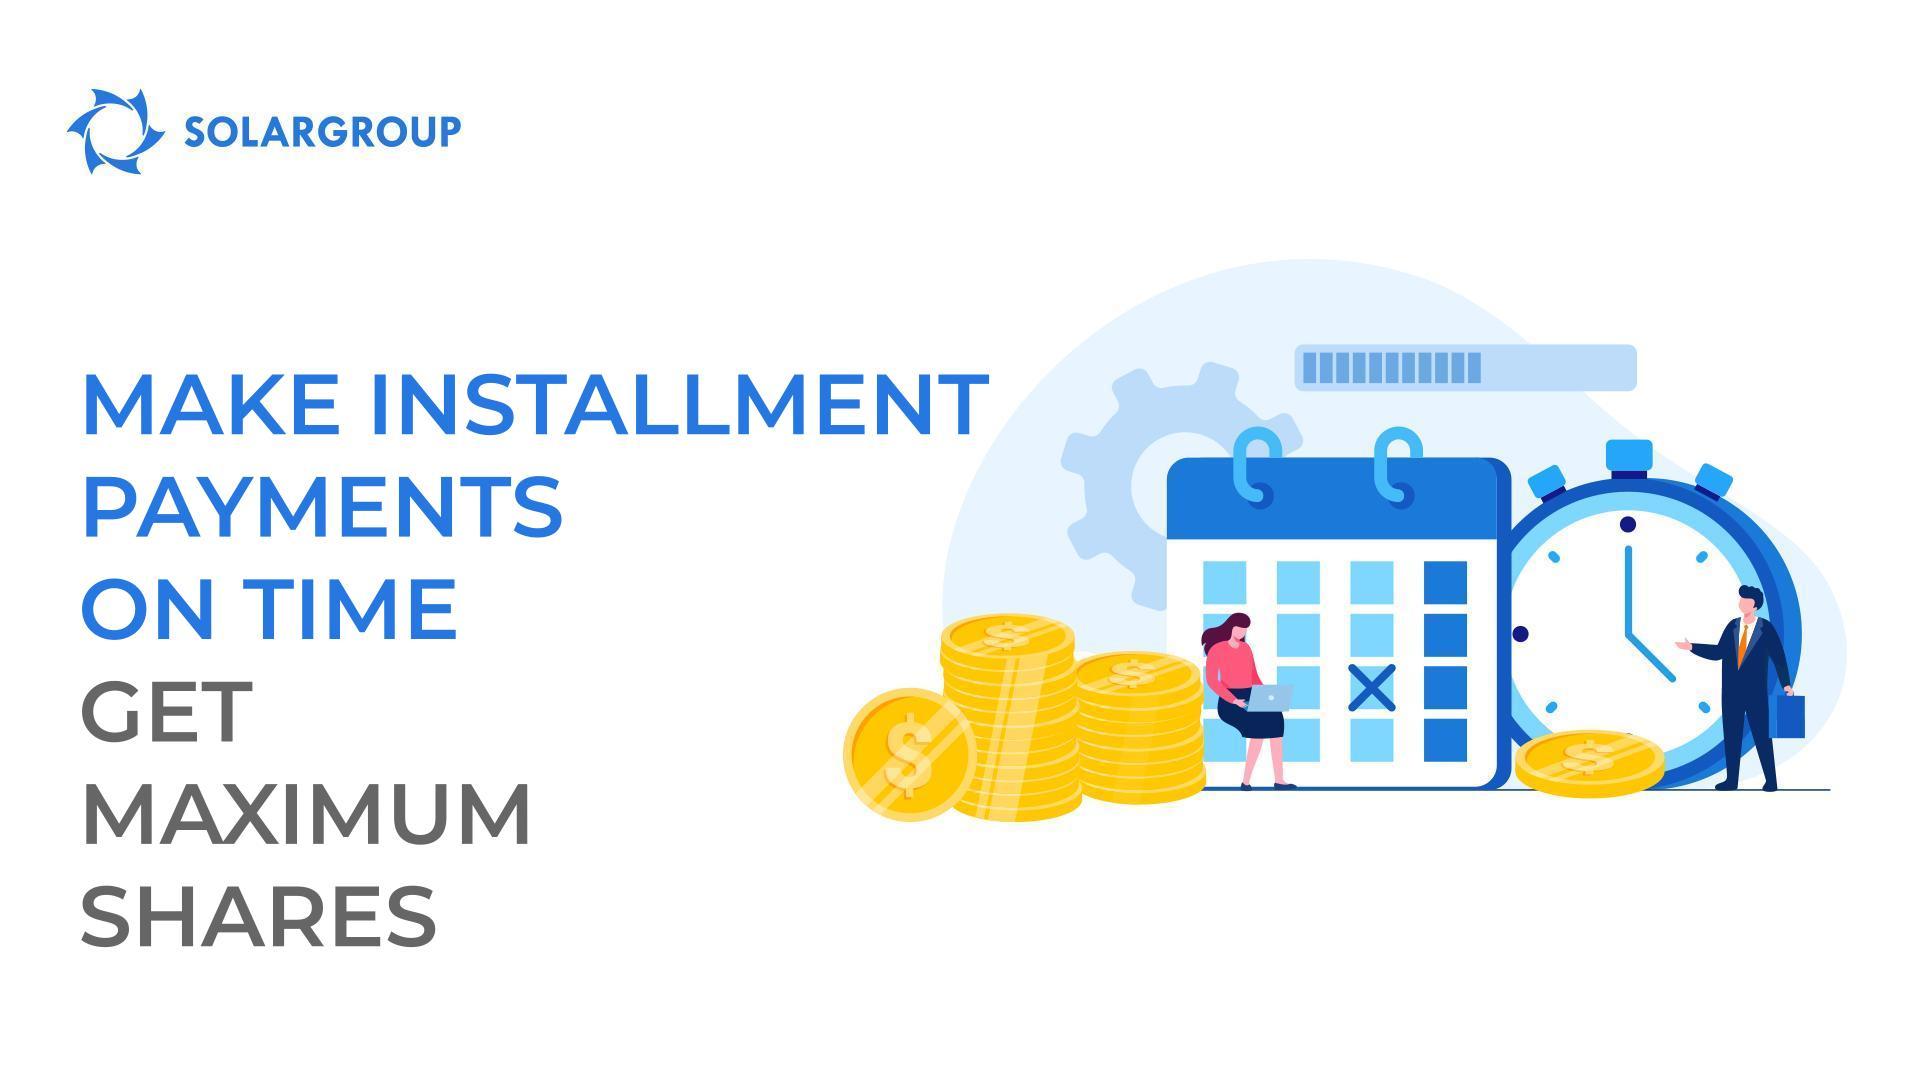 Make your installment payments on time - get maximum shares